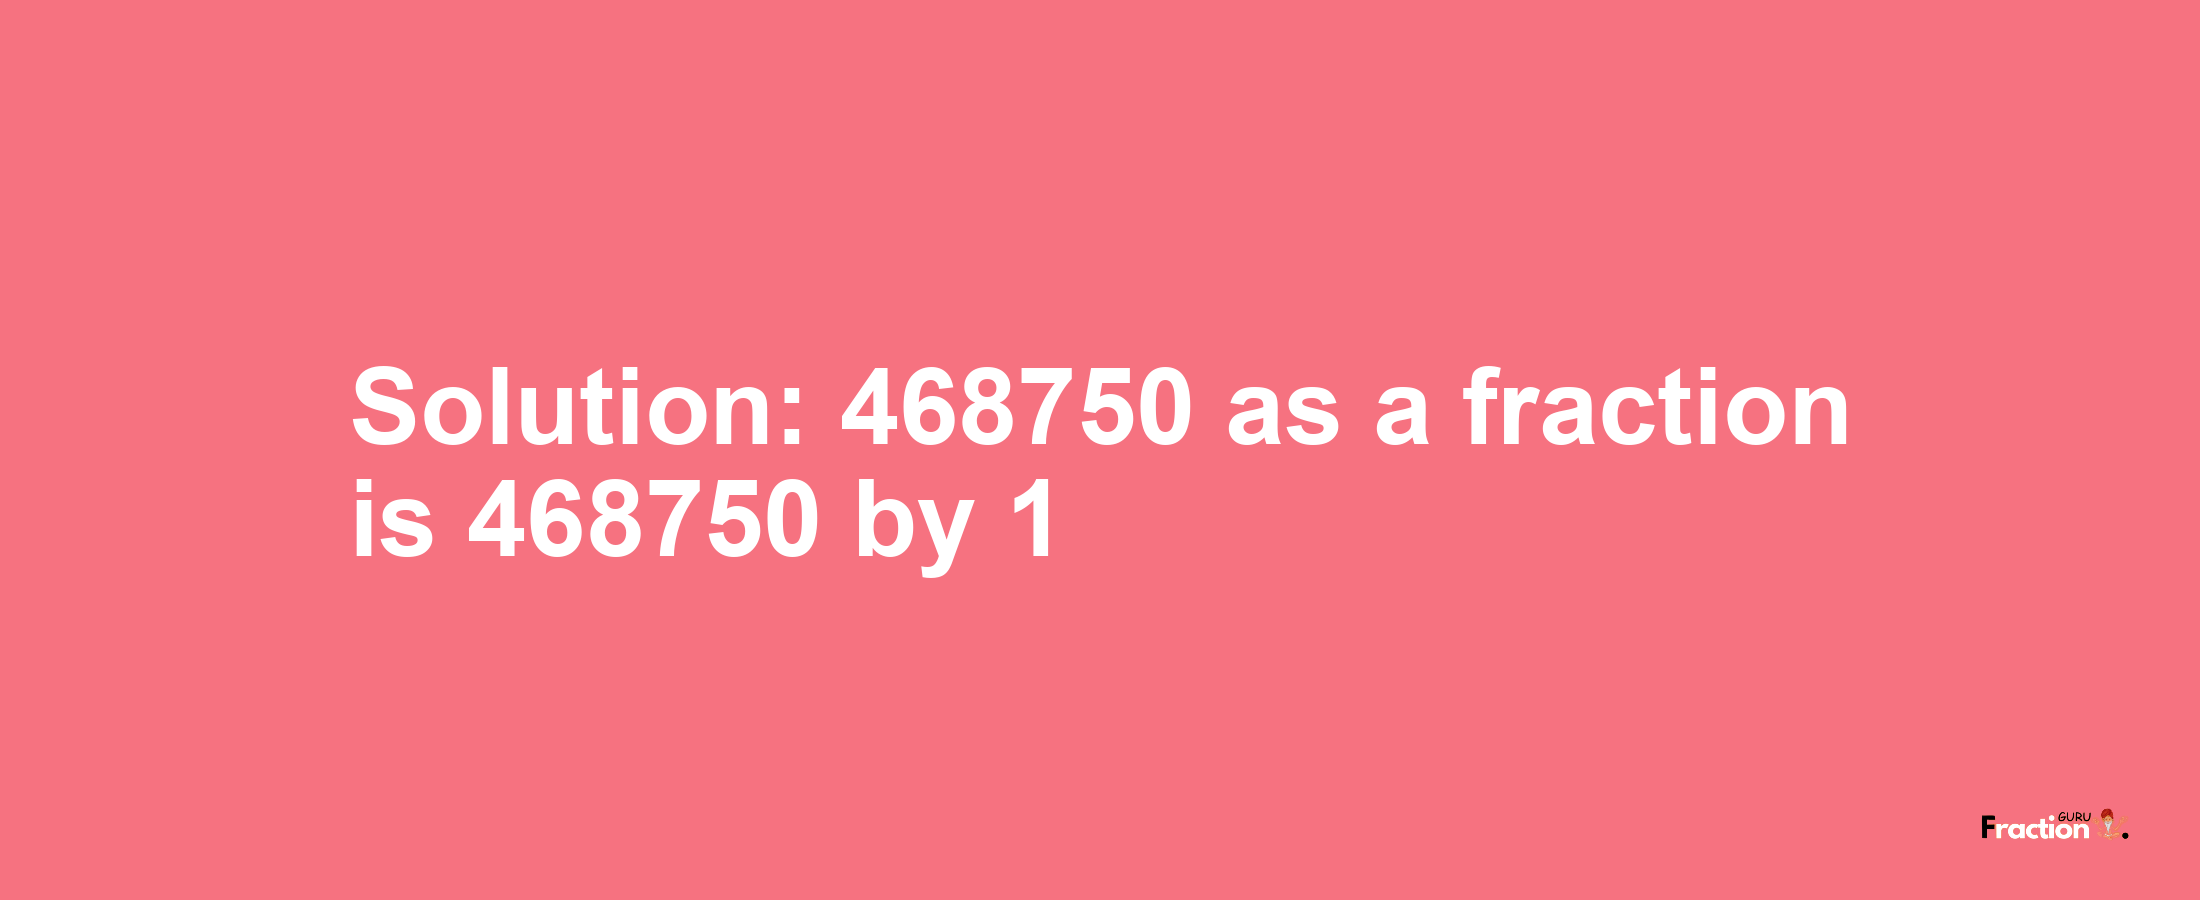 Solution:468750 as a fraction is 468750/1